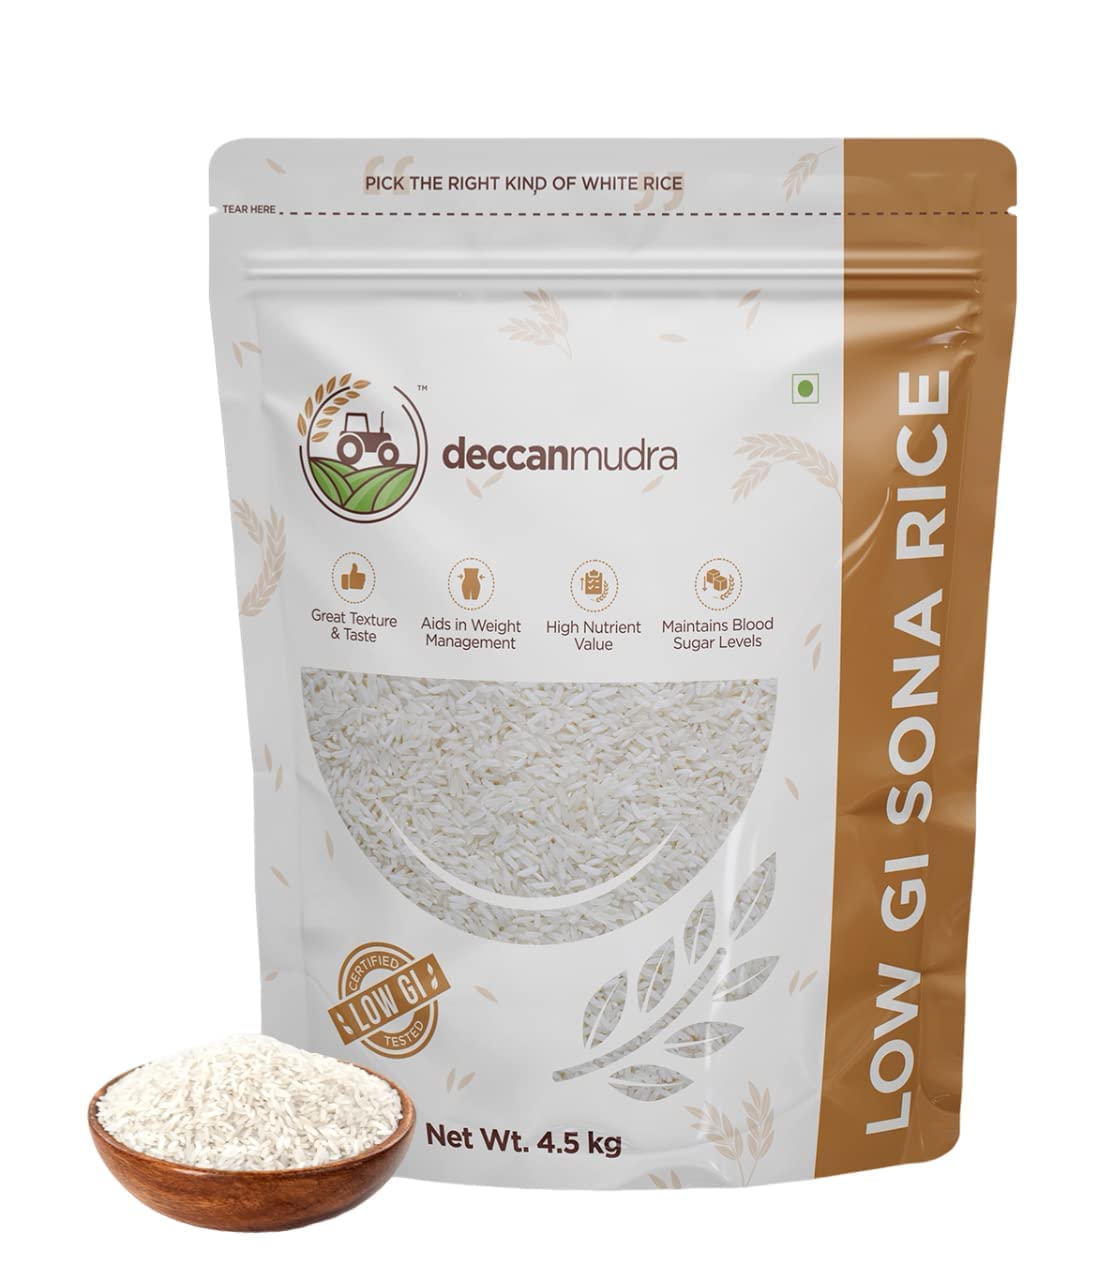 Deccan Mudra Low GI (Glycemic Index) | Diabetic Single Polish White Rice | Telangana Sona Rice | Low Fat | High Protein | High Fibre - 5 kg (Pack of 1)